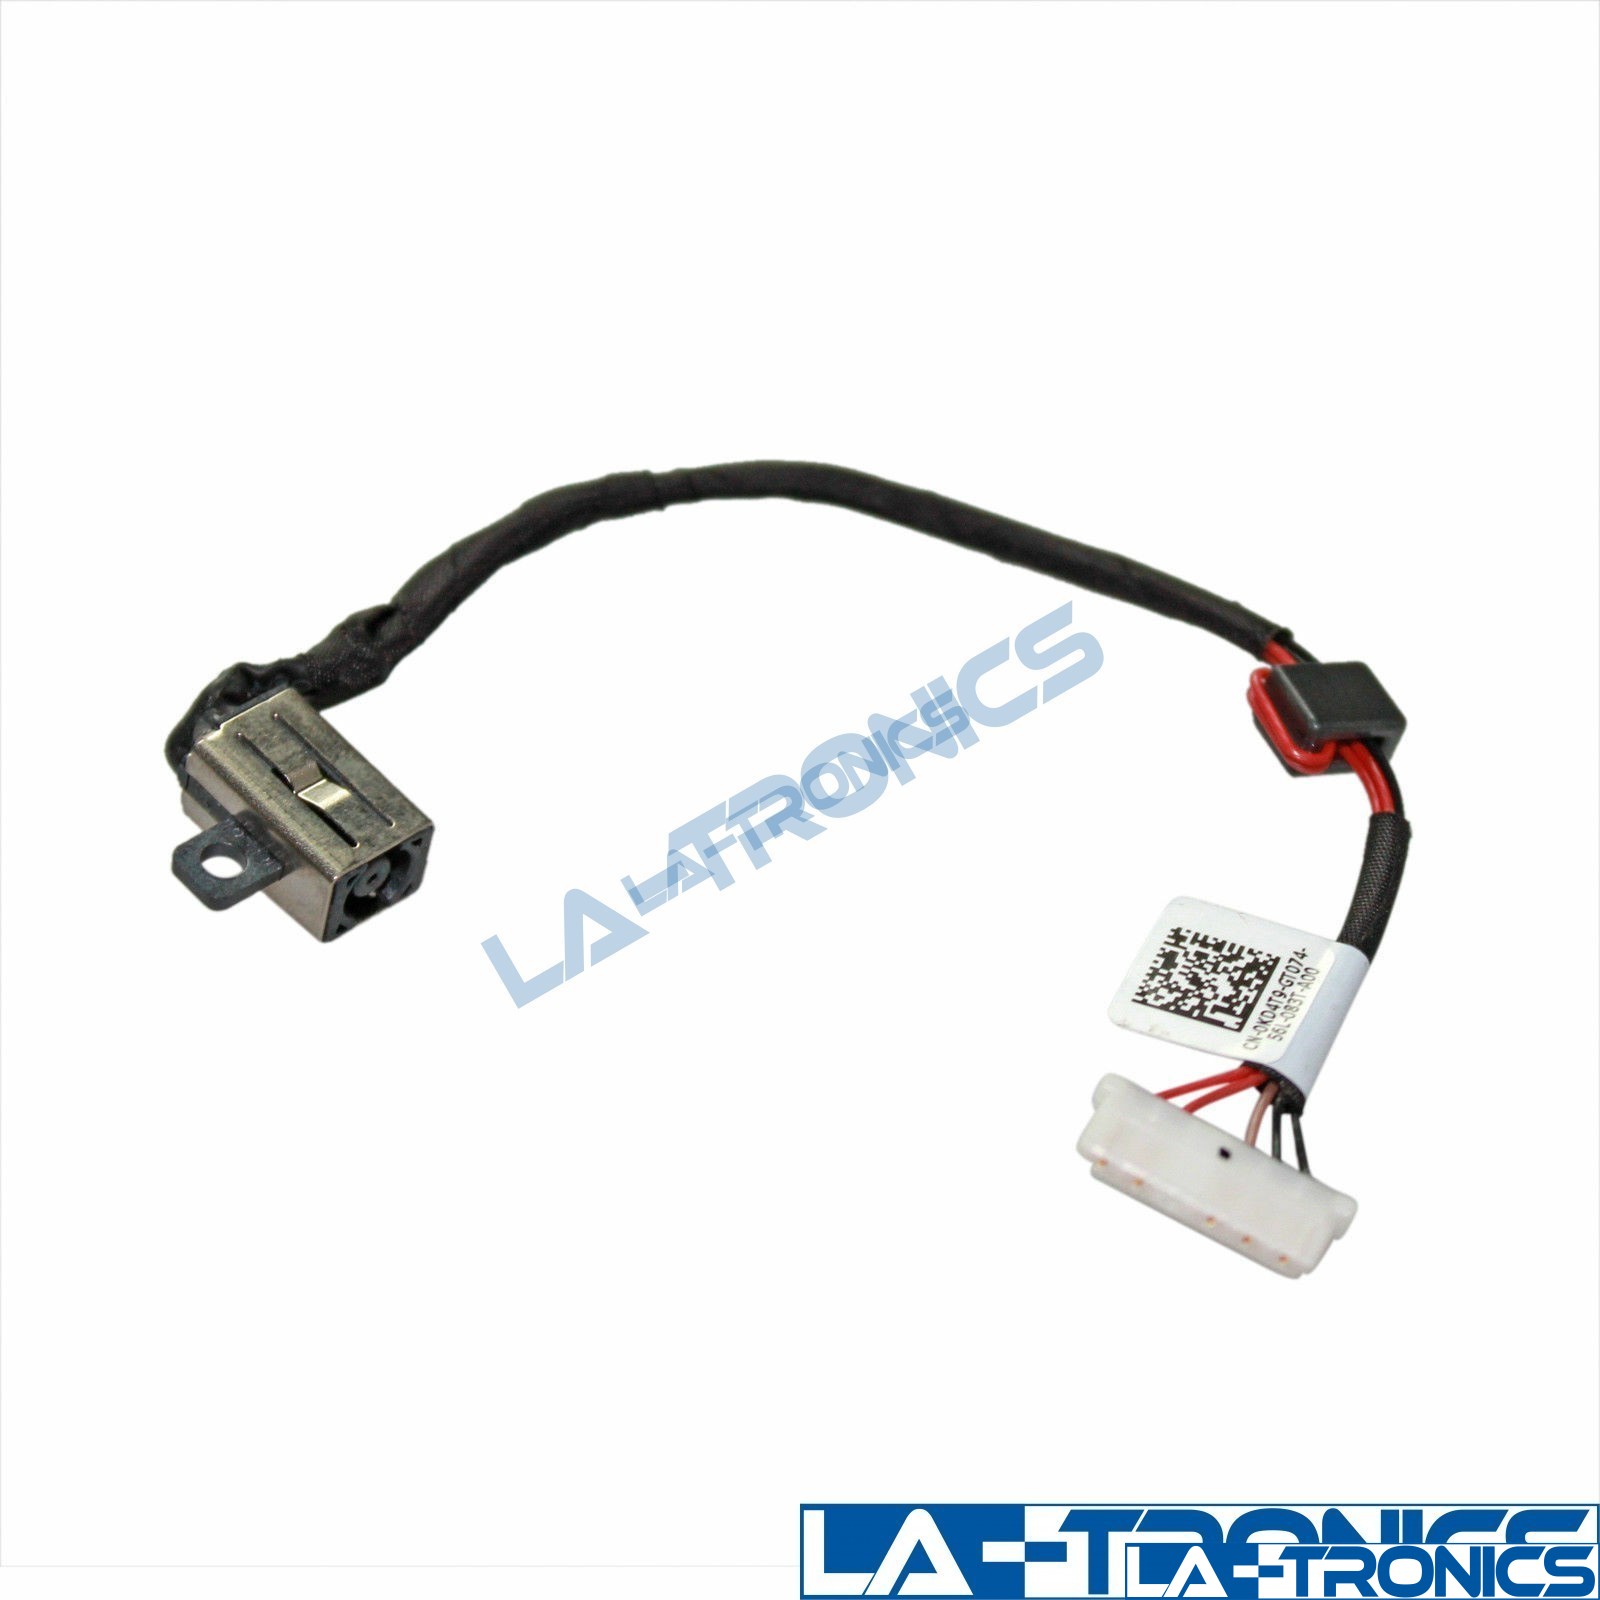 Dell Inspiron 14 5458 DC POWER JACK CABLE HARNESS DC30100UD00 30C53 0KD4T9